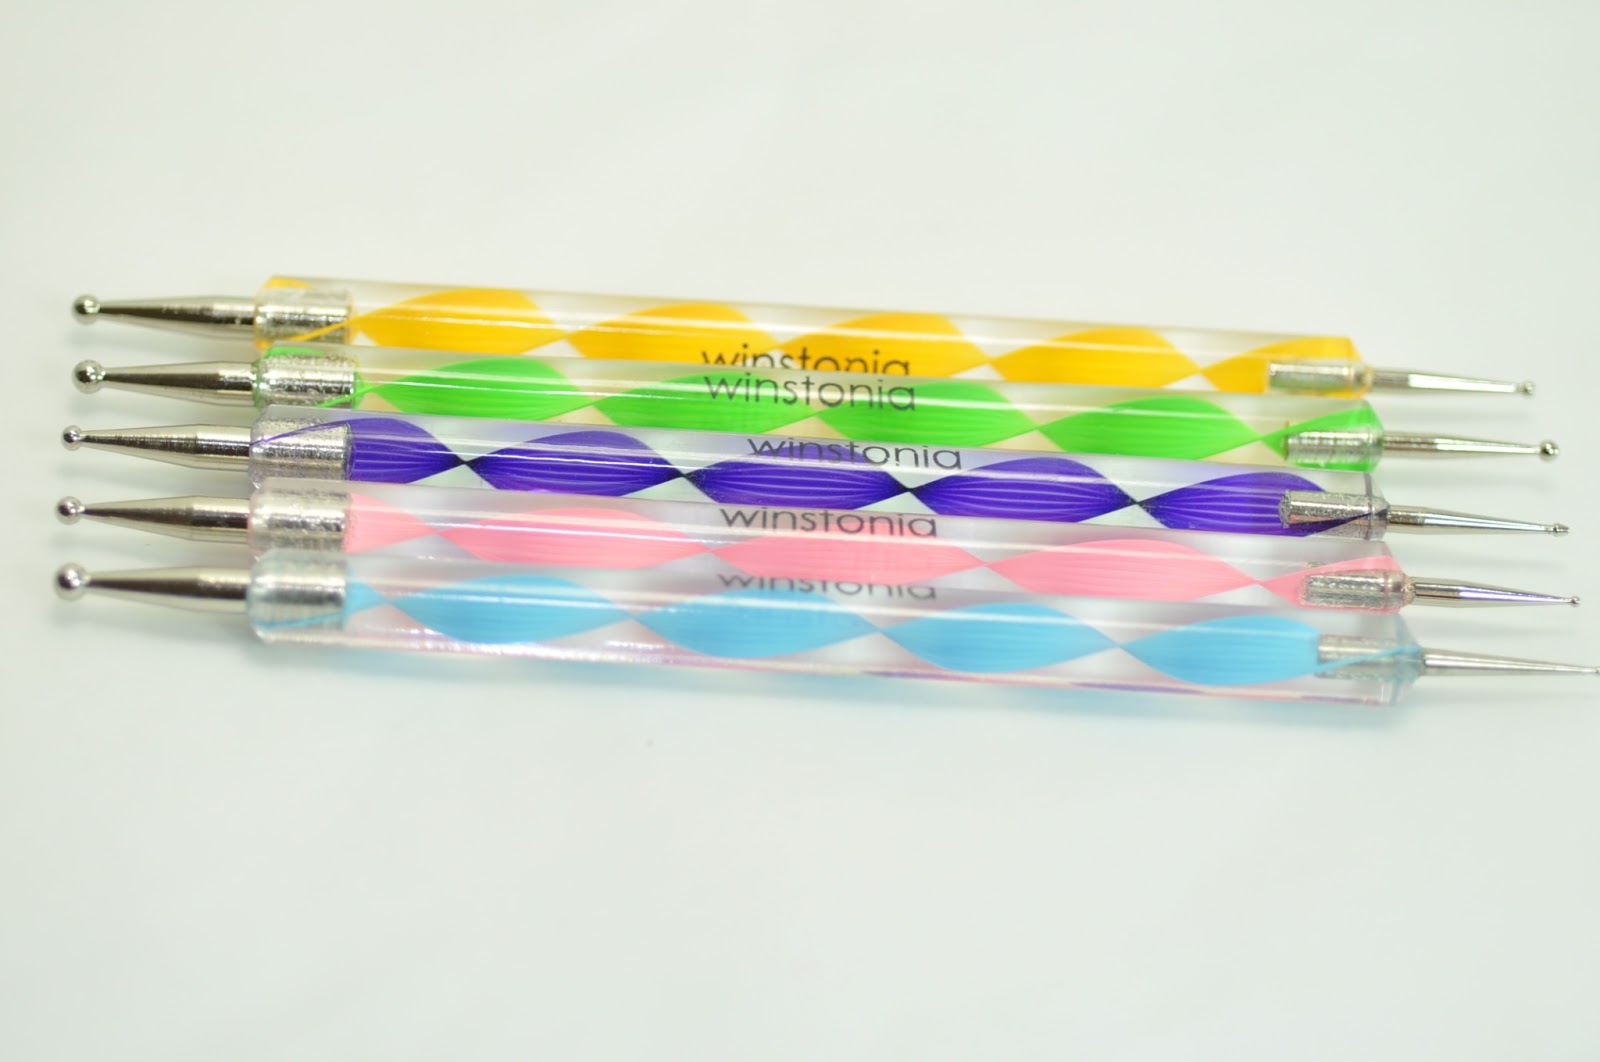 8. Nail Art Dotting Tool for Professional Use - wide 7